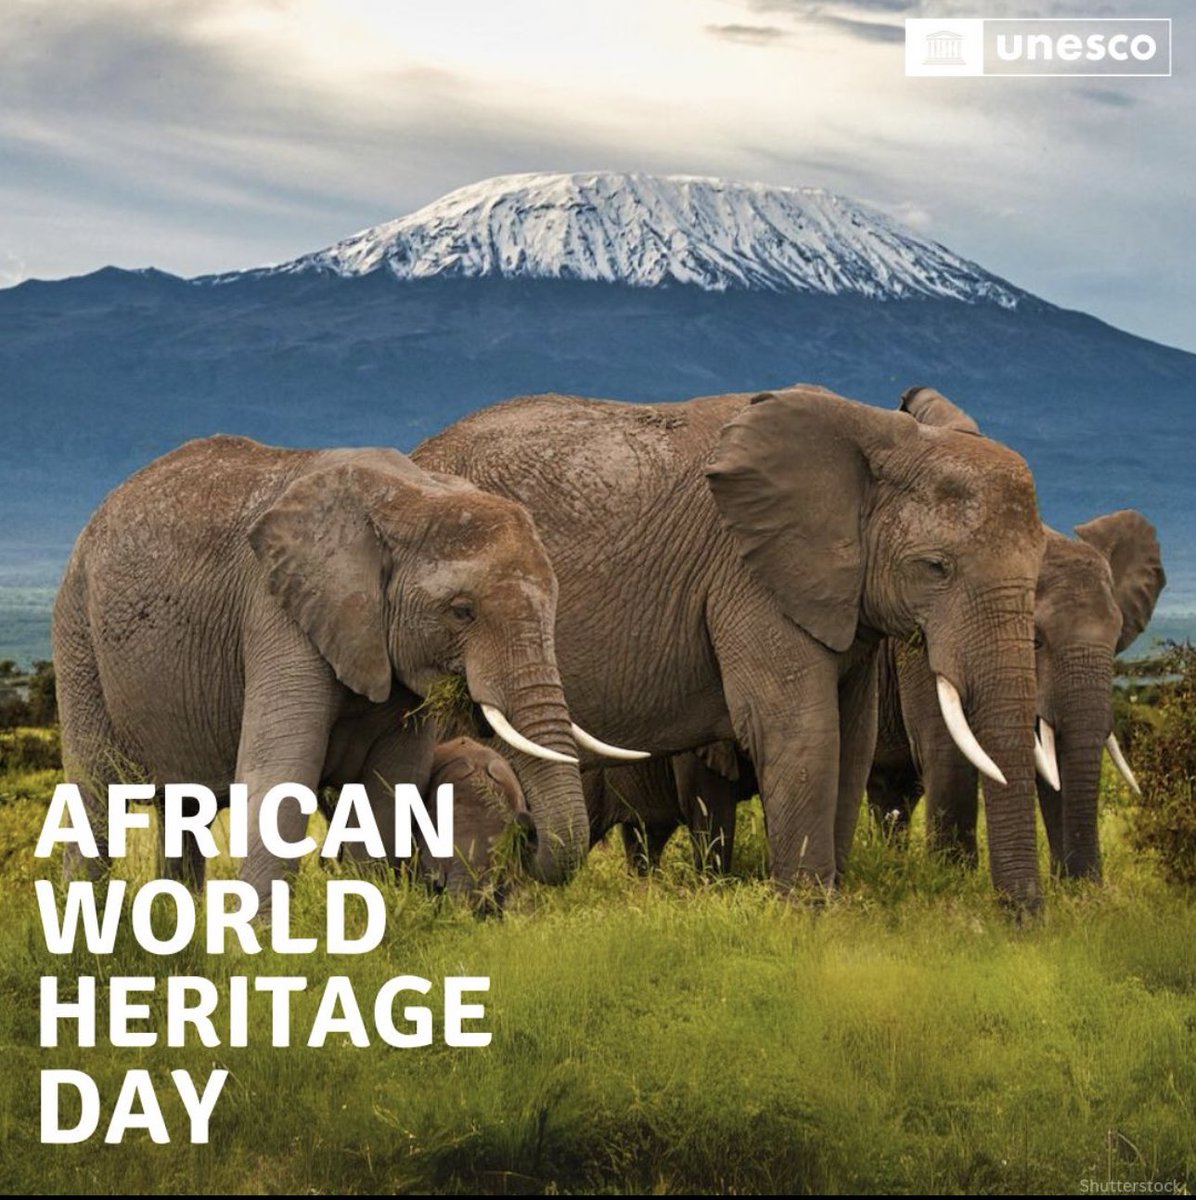 The future of our shared heritage includes the future of #WorldHeritage in #Africa! Today on #African World Heritage Day, learn more about #UNESCO ’s work to safeguard our irreplaceable heritage in Africa! Message from @AAzoulay 👇🏾 whc.unesco.org/en/news/2685/